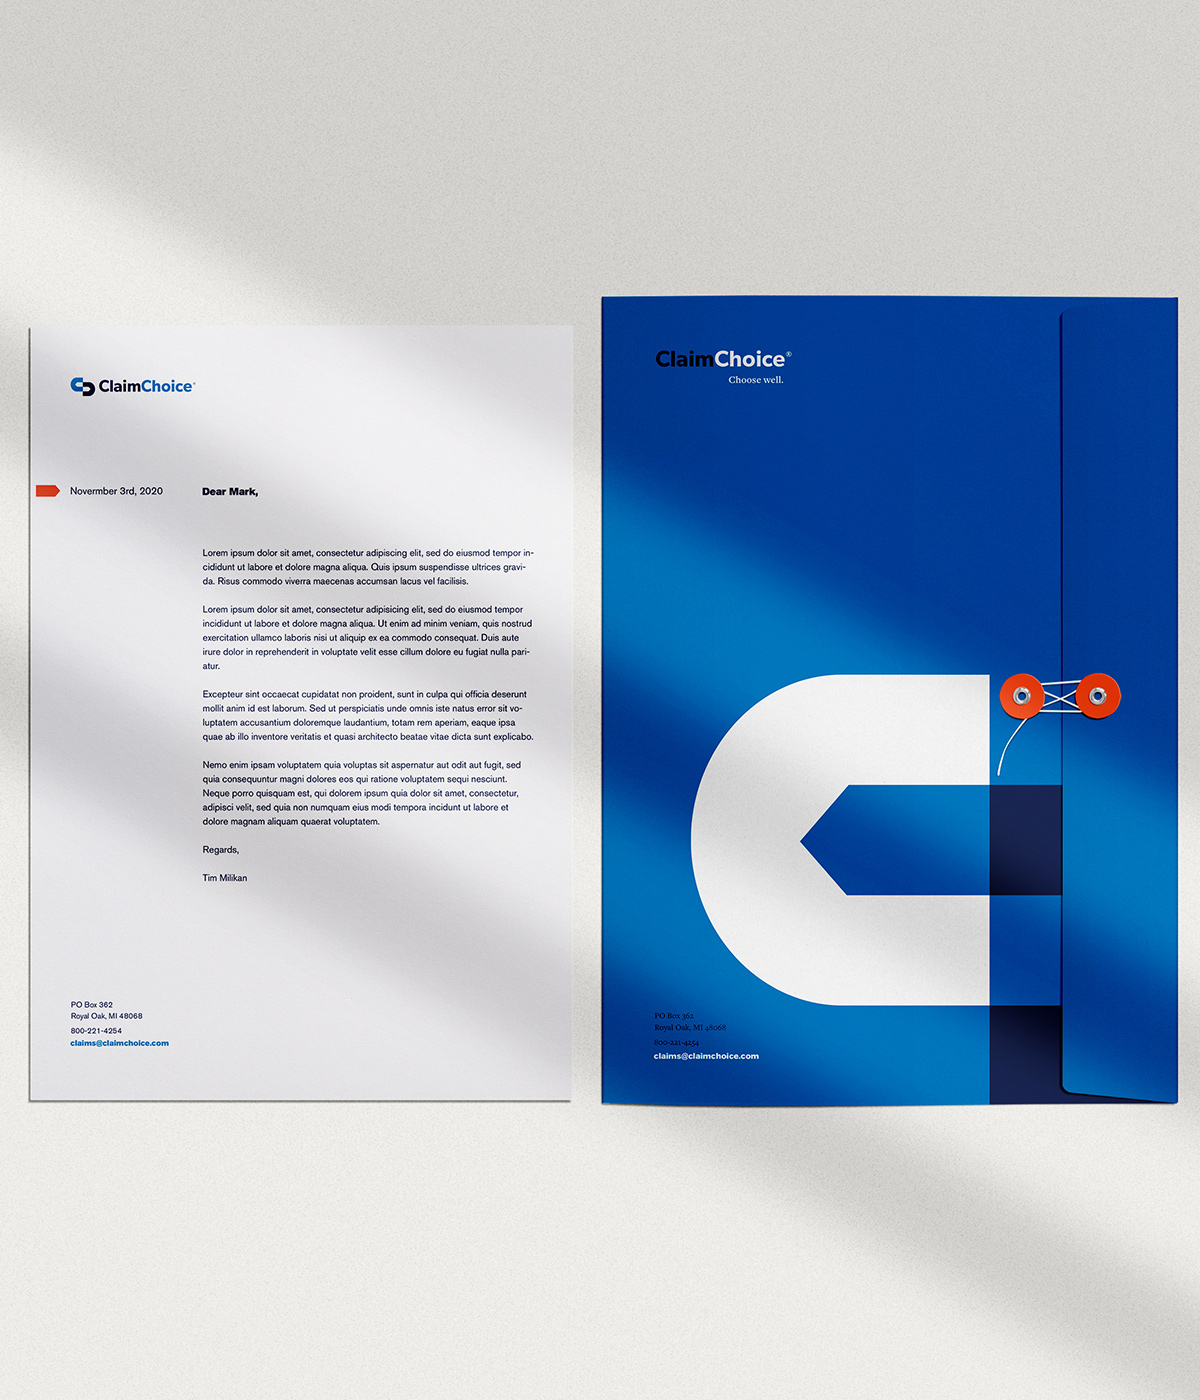 ClaimChoice's new branding on letterhead and marketing materials